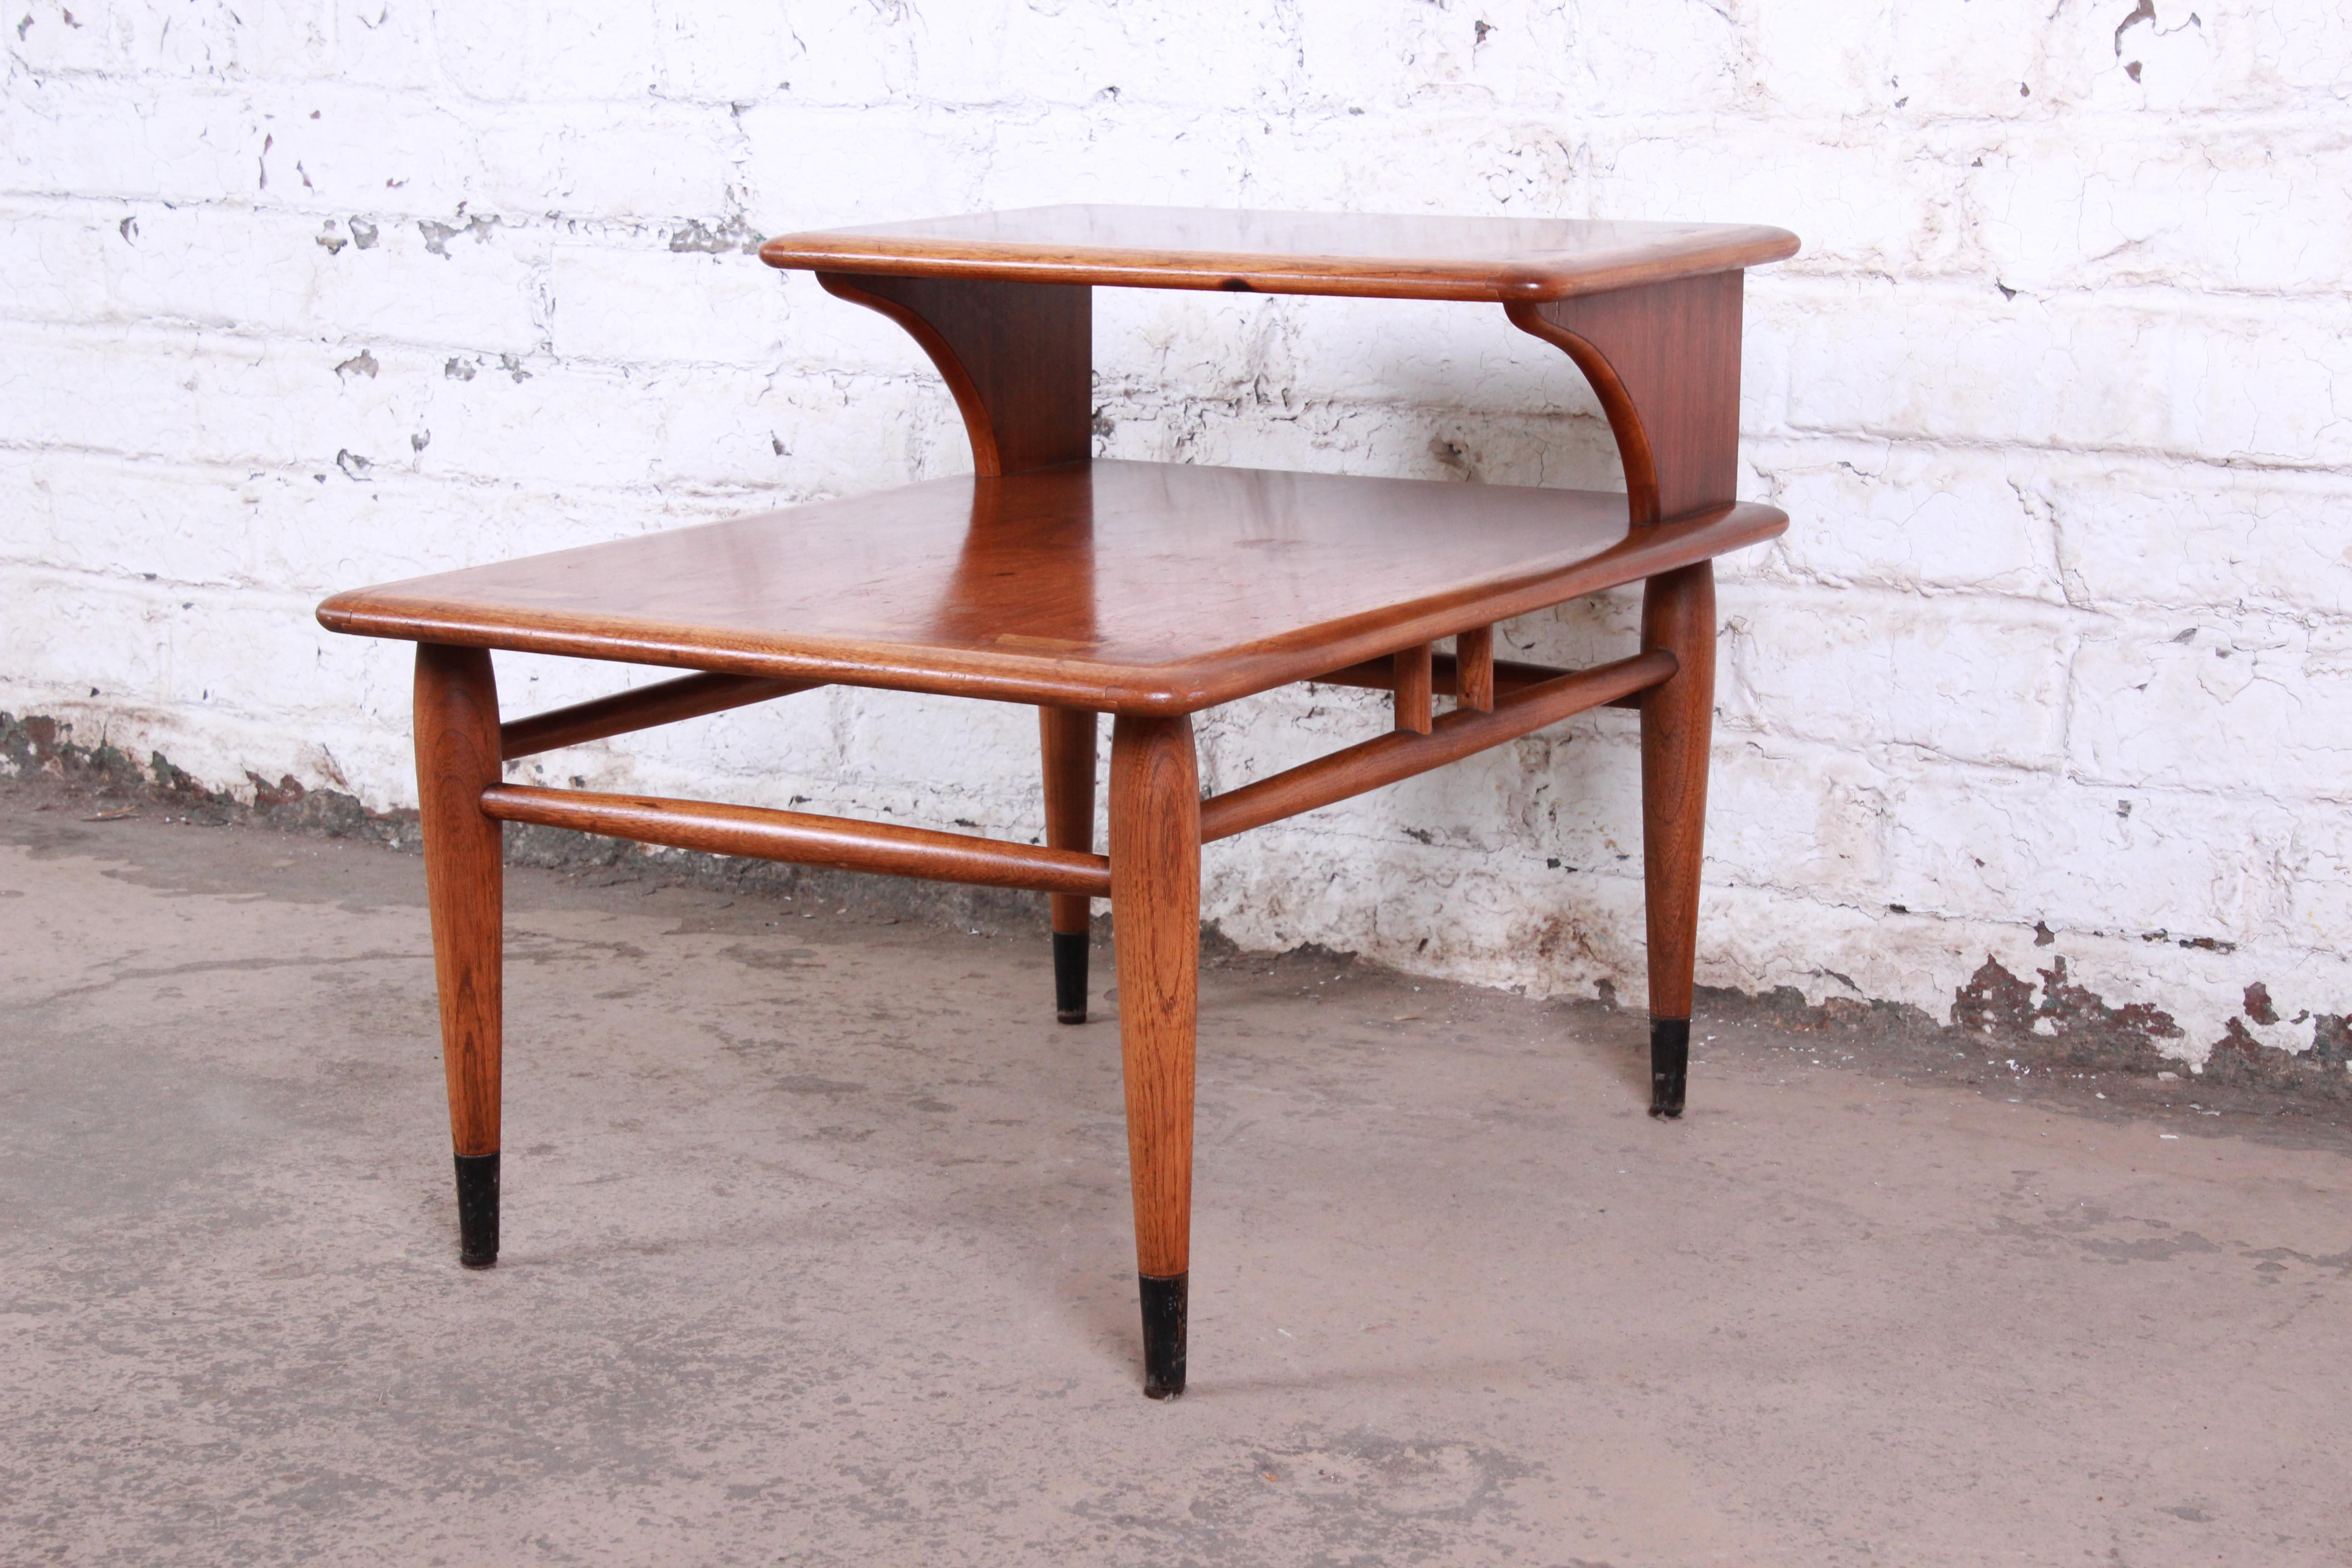 A gorgeous Mid-Century Modern step end table from the Acclaim line by Lane. The table features beautiful walnut and ash wood grain and a unique dovetail design. It sits on tapered legs with ebonized feet and sleek stretchers connecting the legs. The